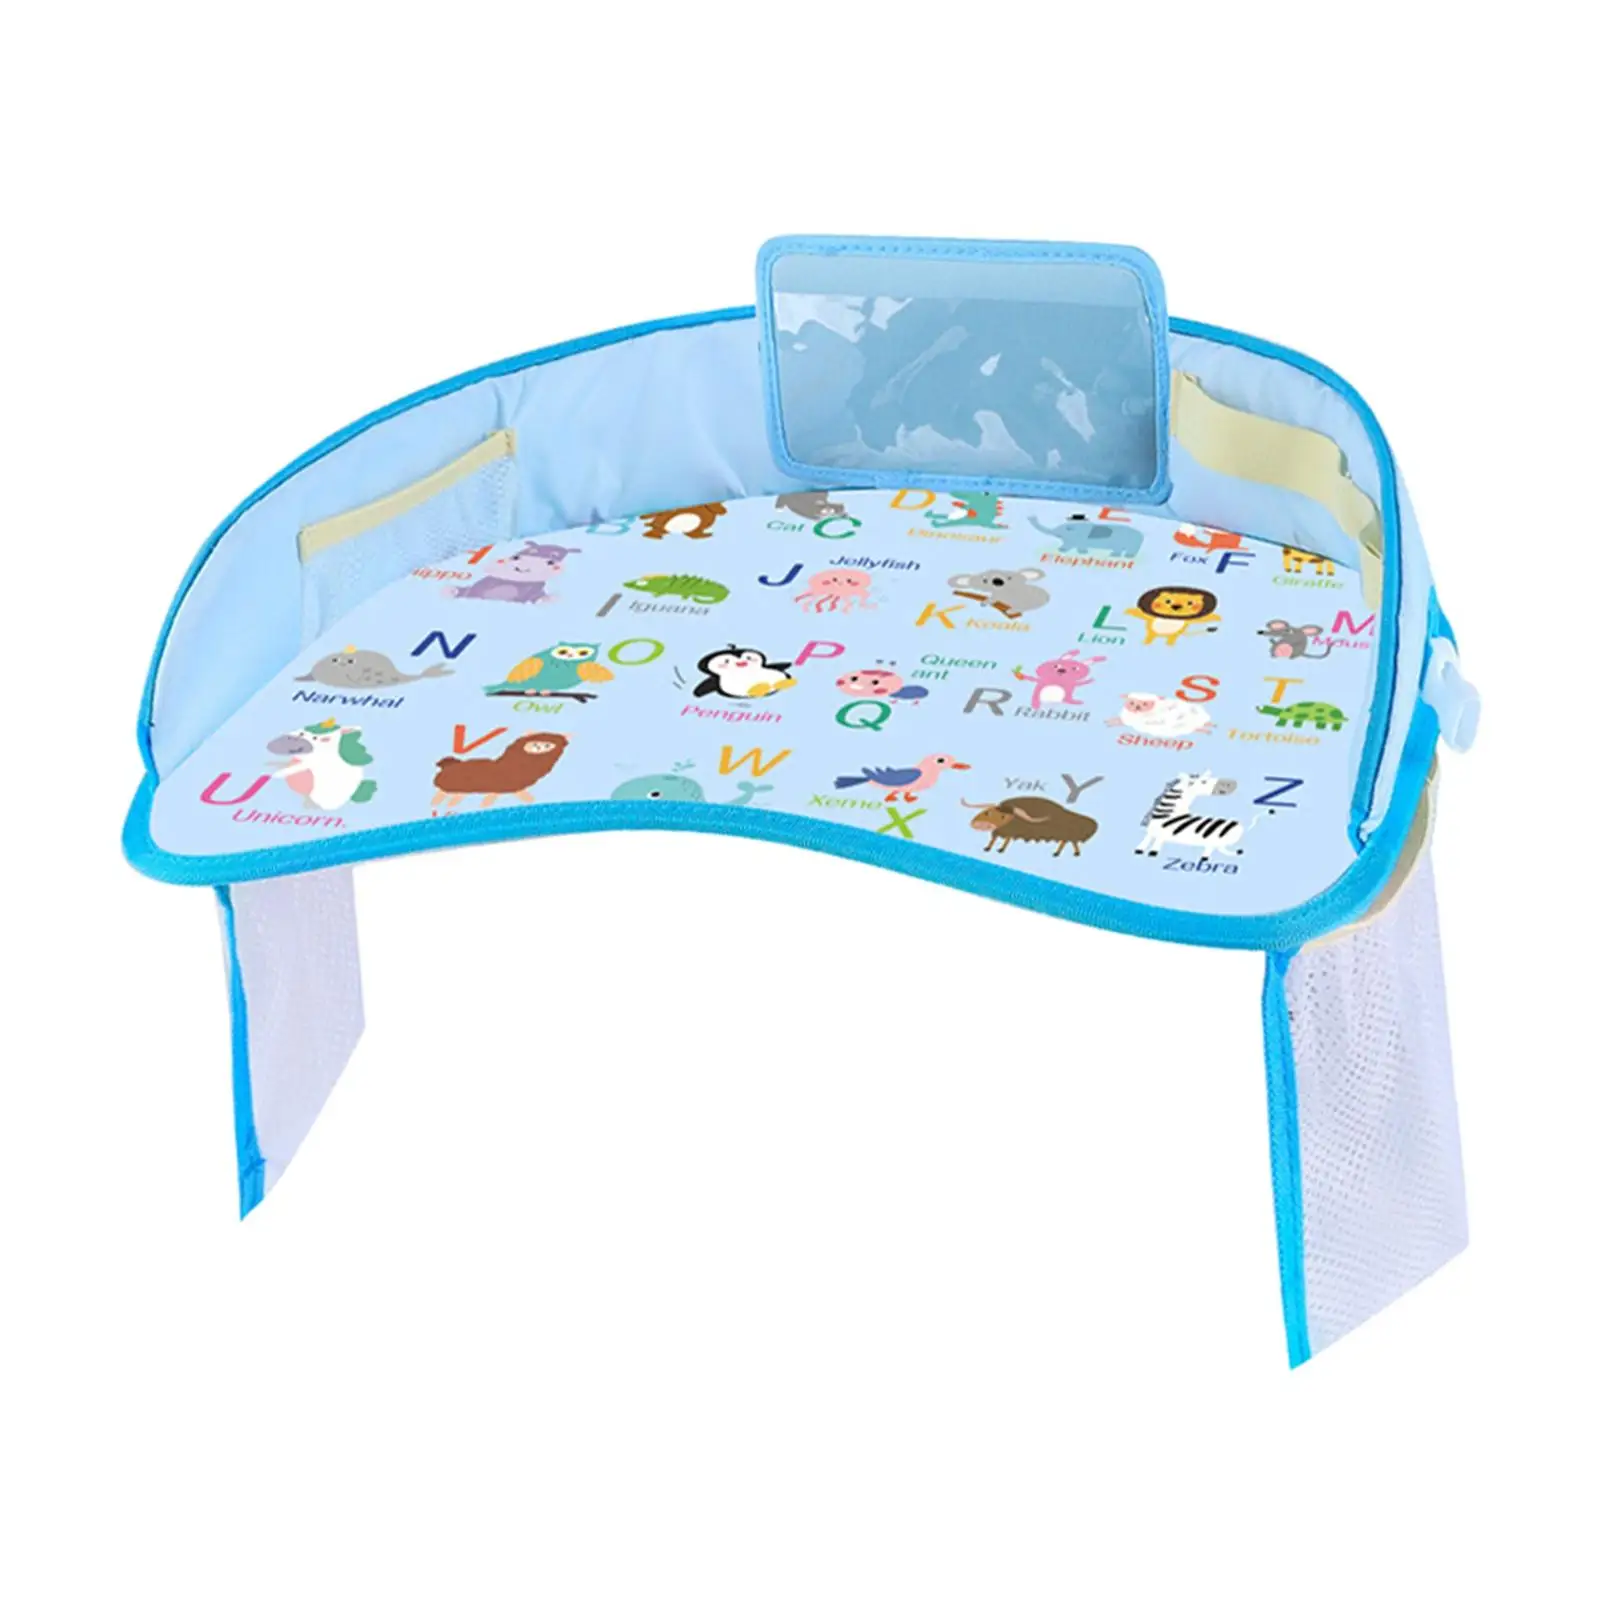 Toddler  Organizer Eating Drawing Snack Activity Tray Waterproof Multifunctional Wipe to Clean Toddler  Lap Tray for Kids